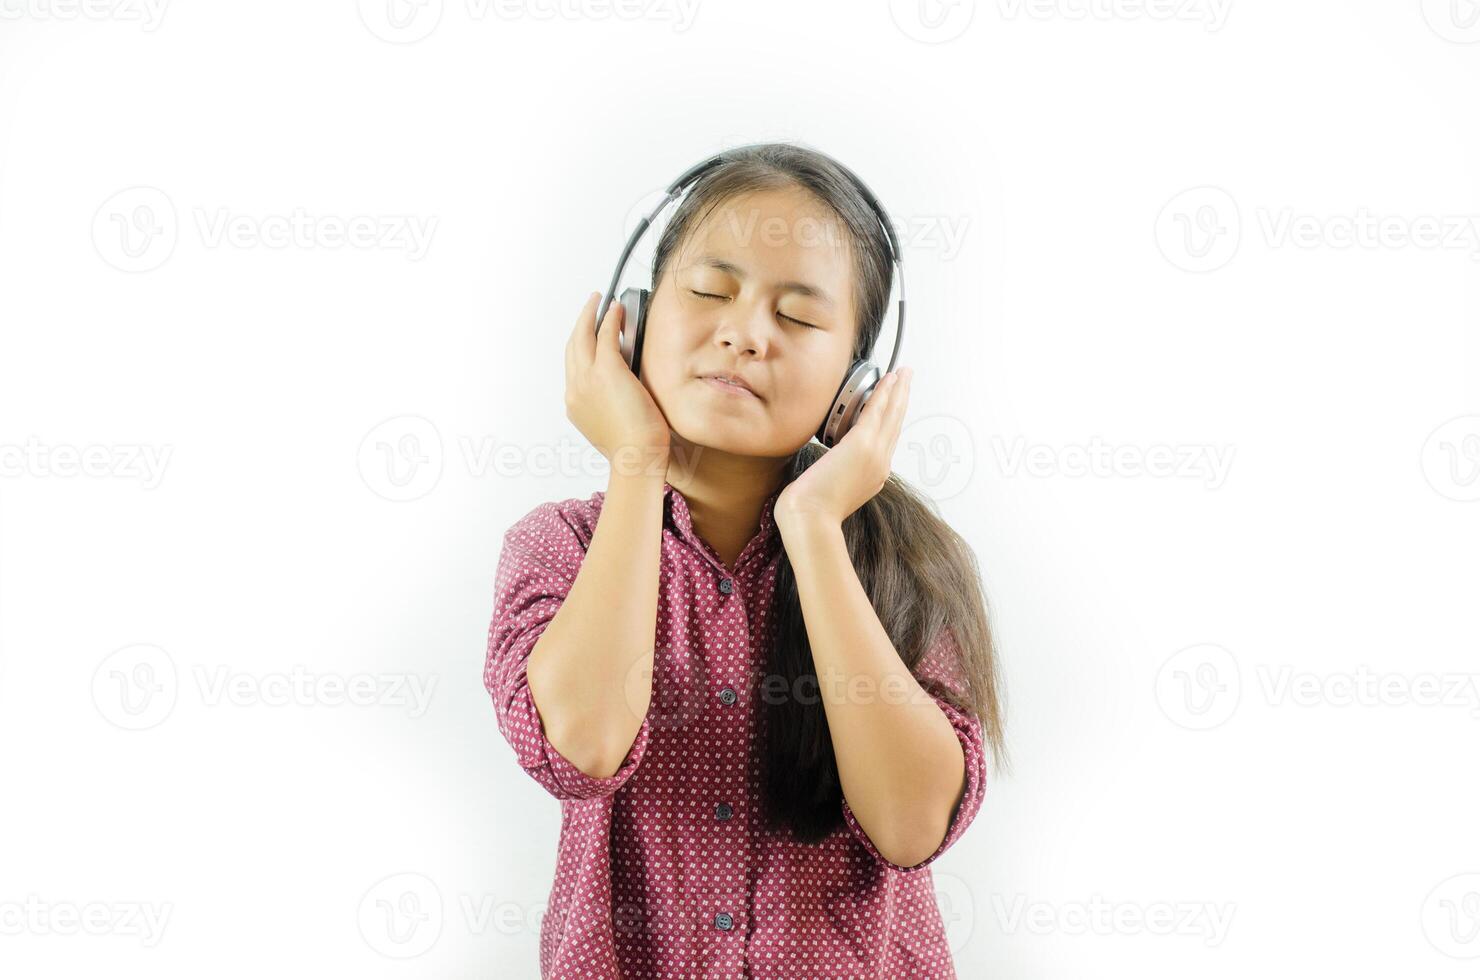 Asian girl happy smiling with headphones music concept portrait photo